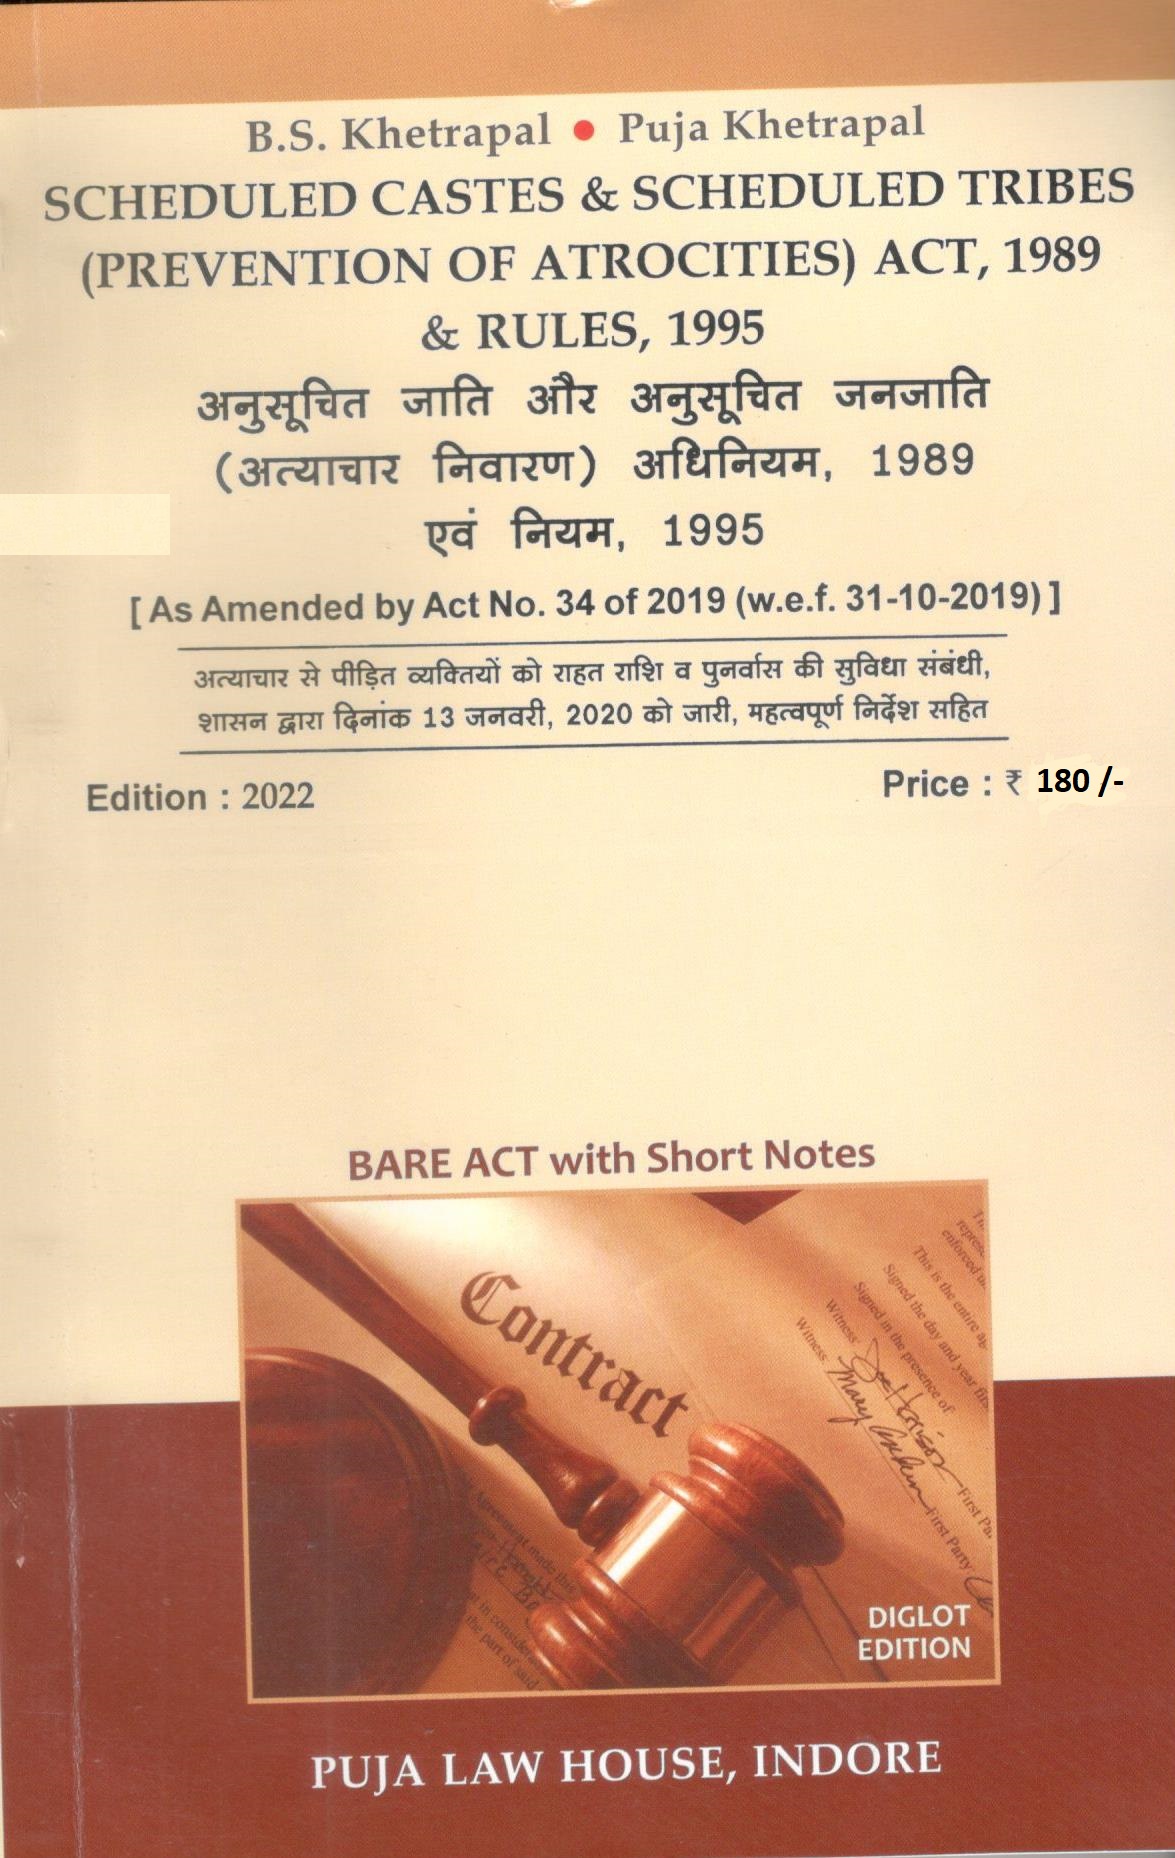  Buy Scheduled Caste and Scheduled Tribes (Prevention of atrocities), 1989 and Rules, 1995 / अनुसूचित जाति और अनुसूचित जनजाति (अत्याचार निवारण), 1989 और नियम, 1995